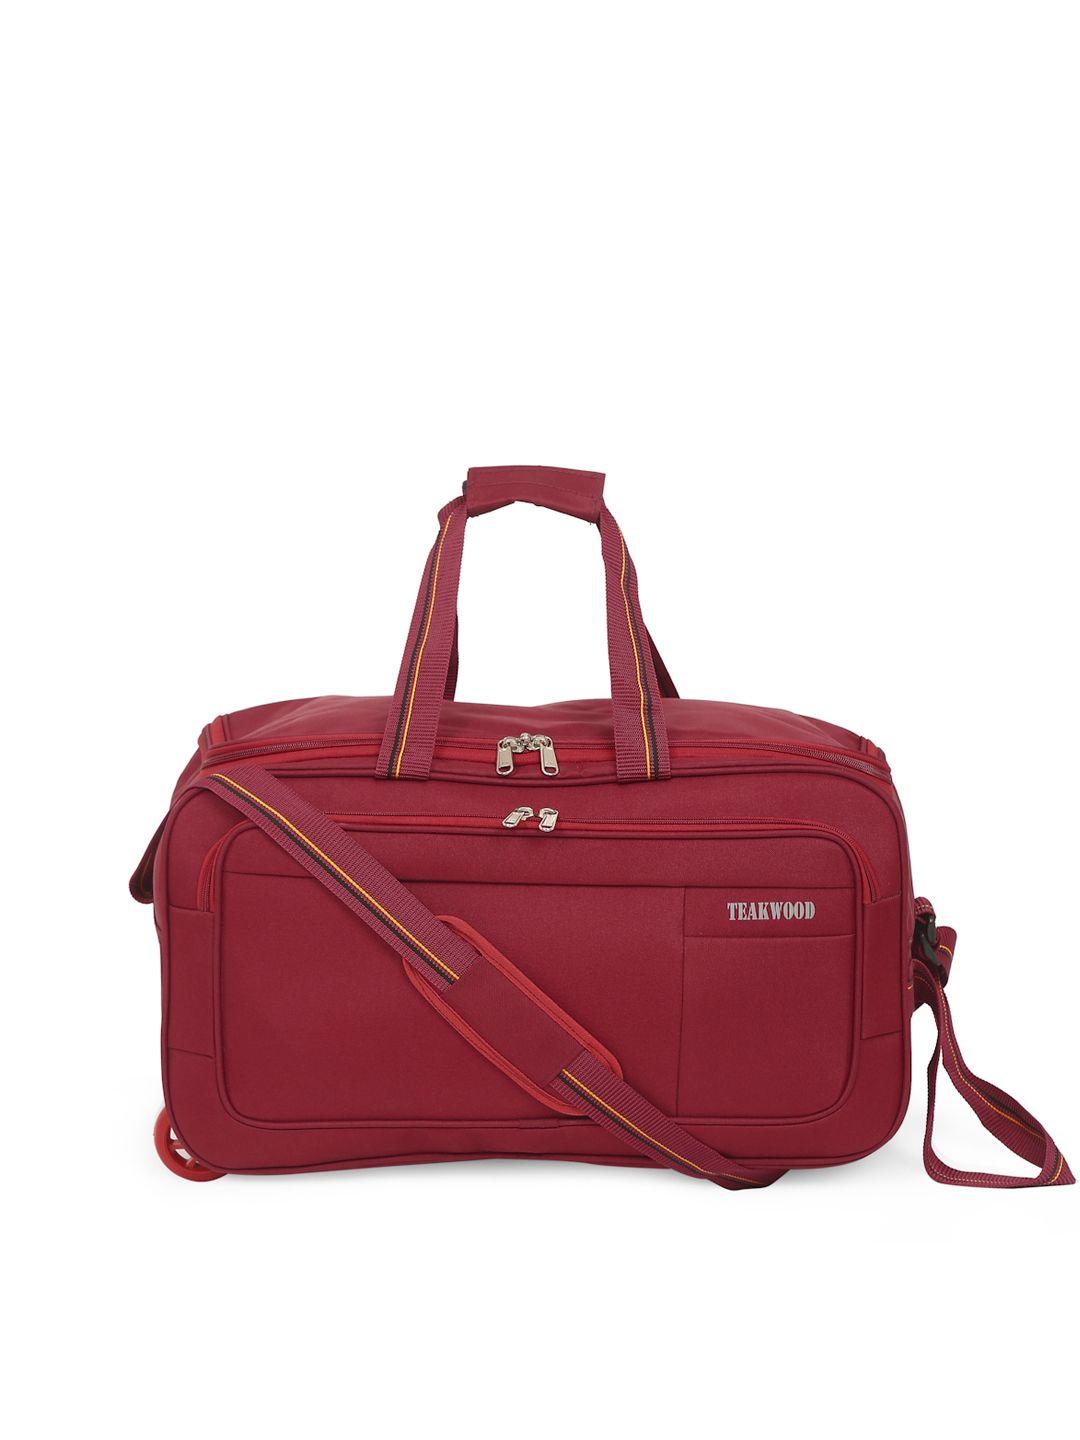 teakwood leathers red solid soft sided cabin duffle bag